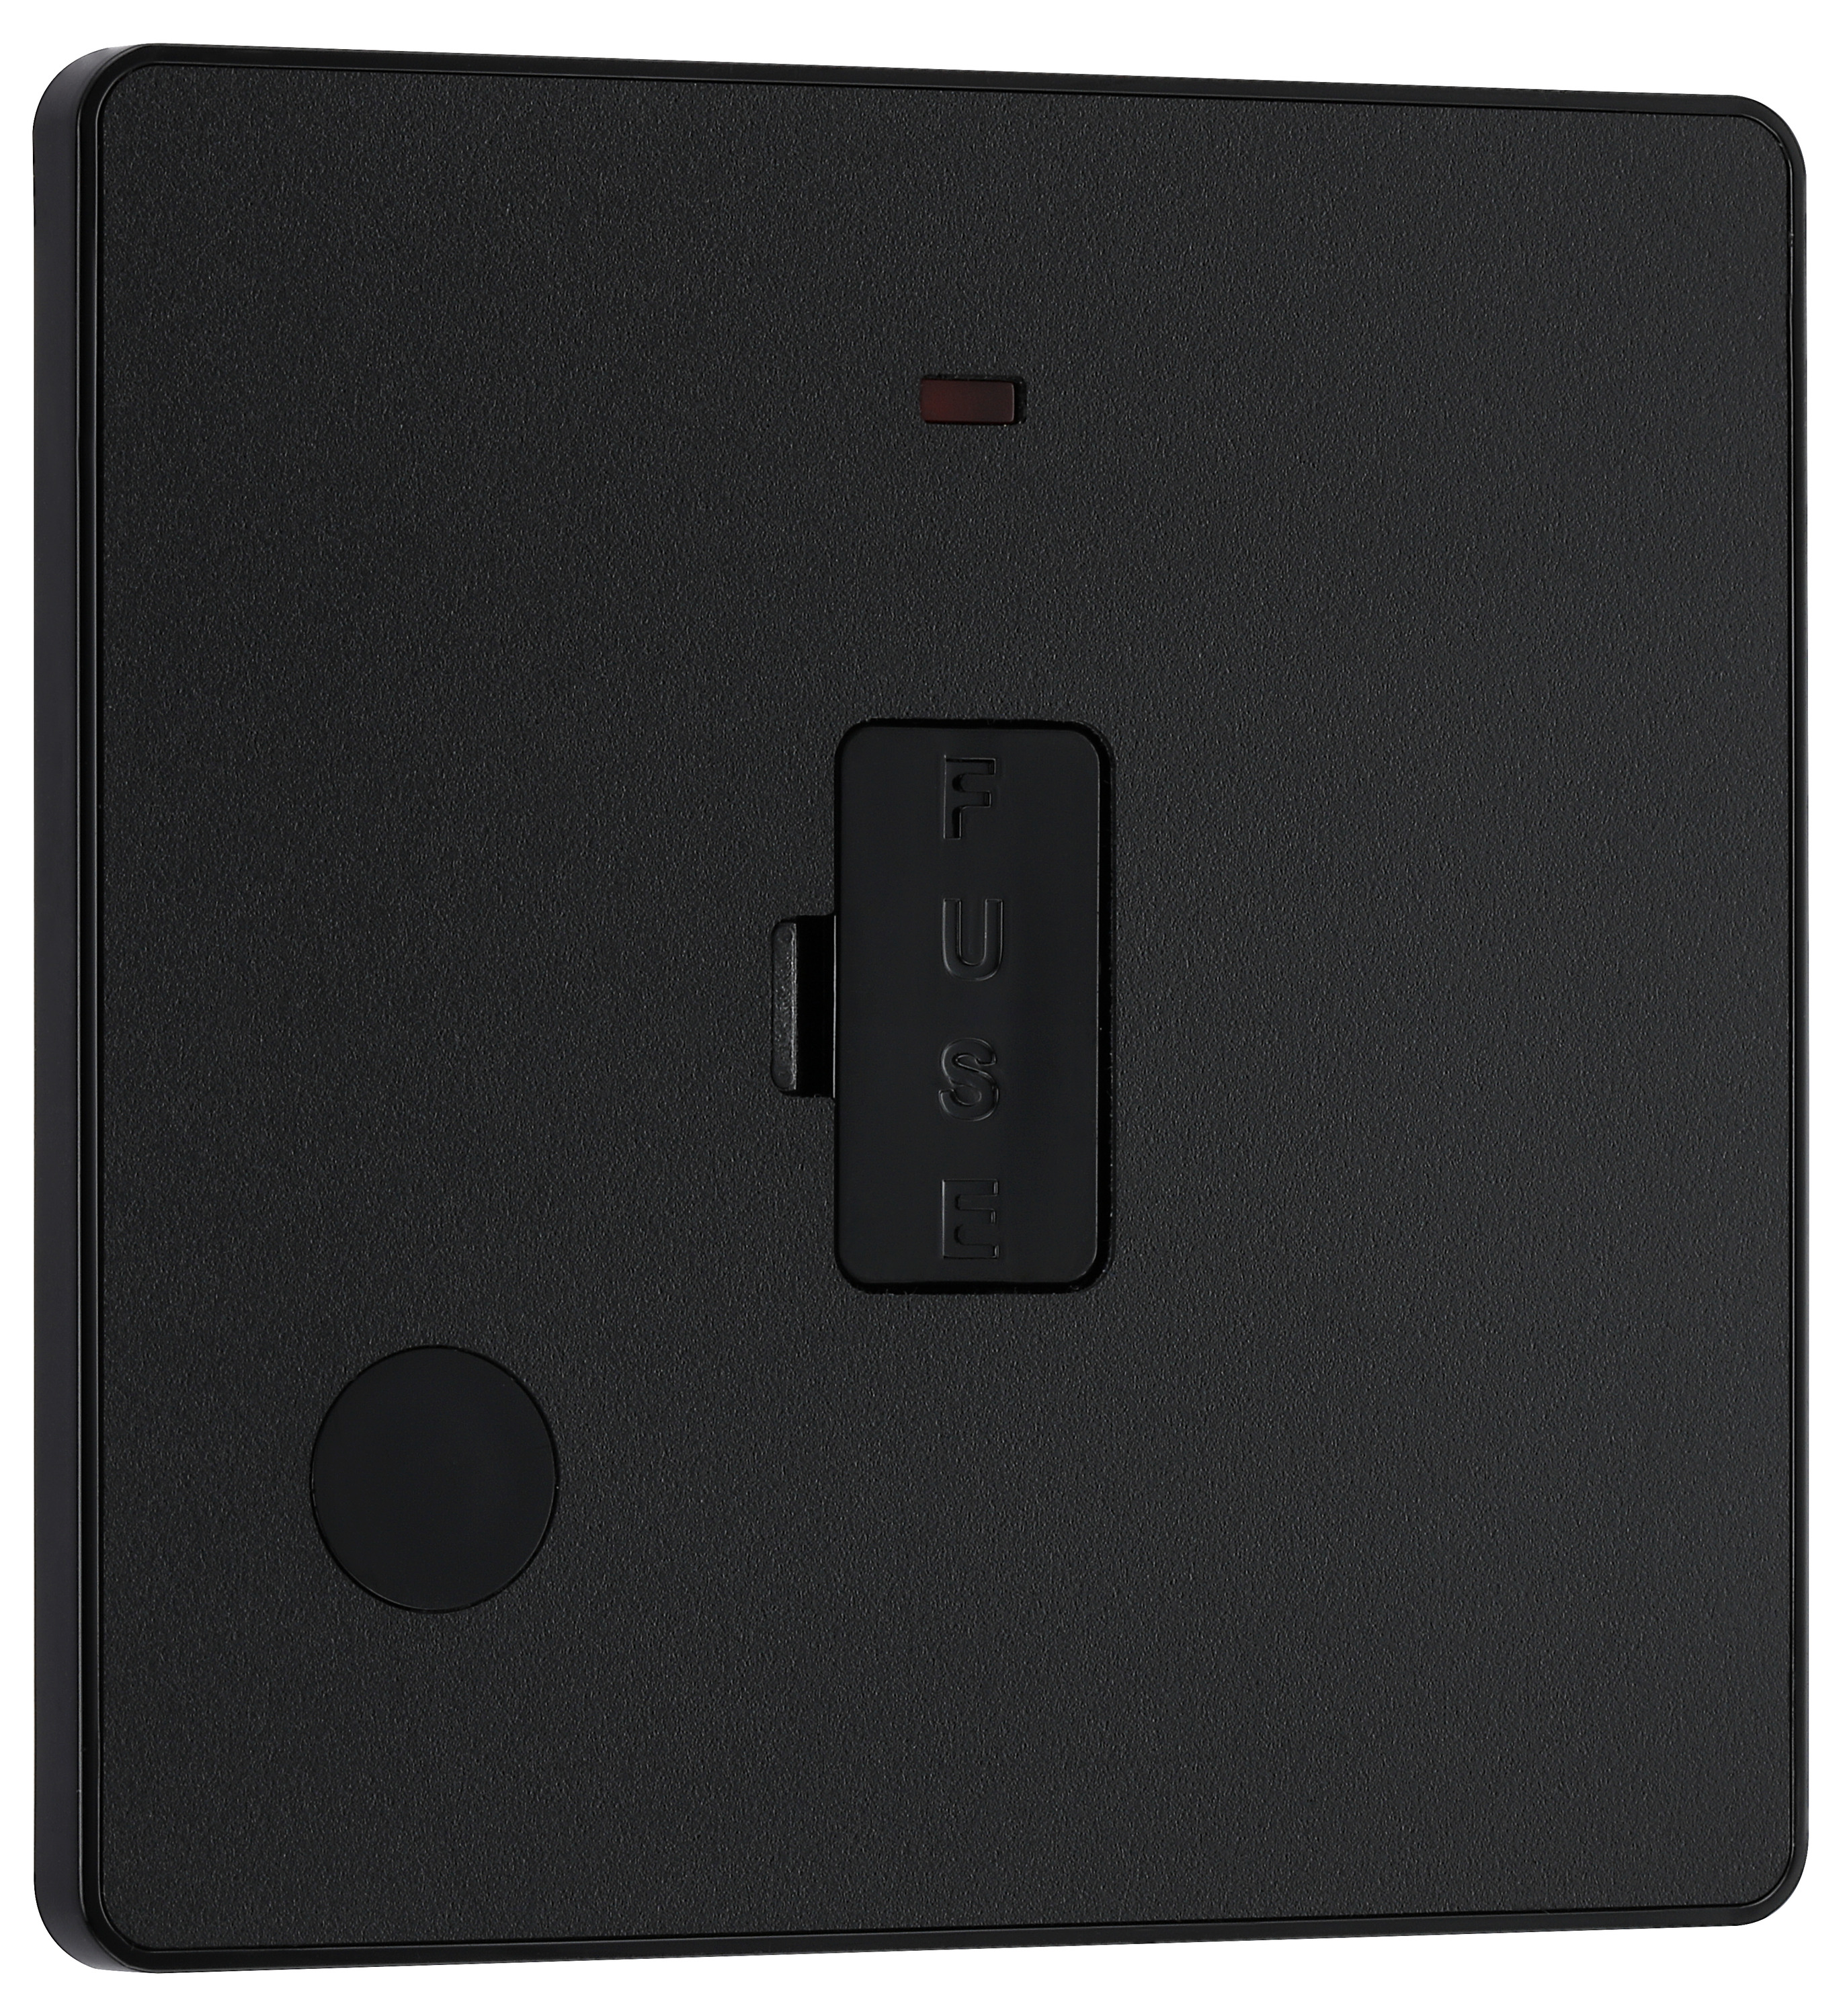 Image of BG Evolve Matt Black 13A Unswitched Fused Connection Unit with Power Led Indicator & Flex Outlet